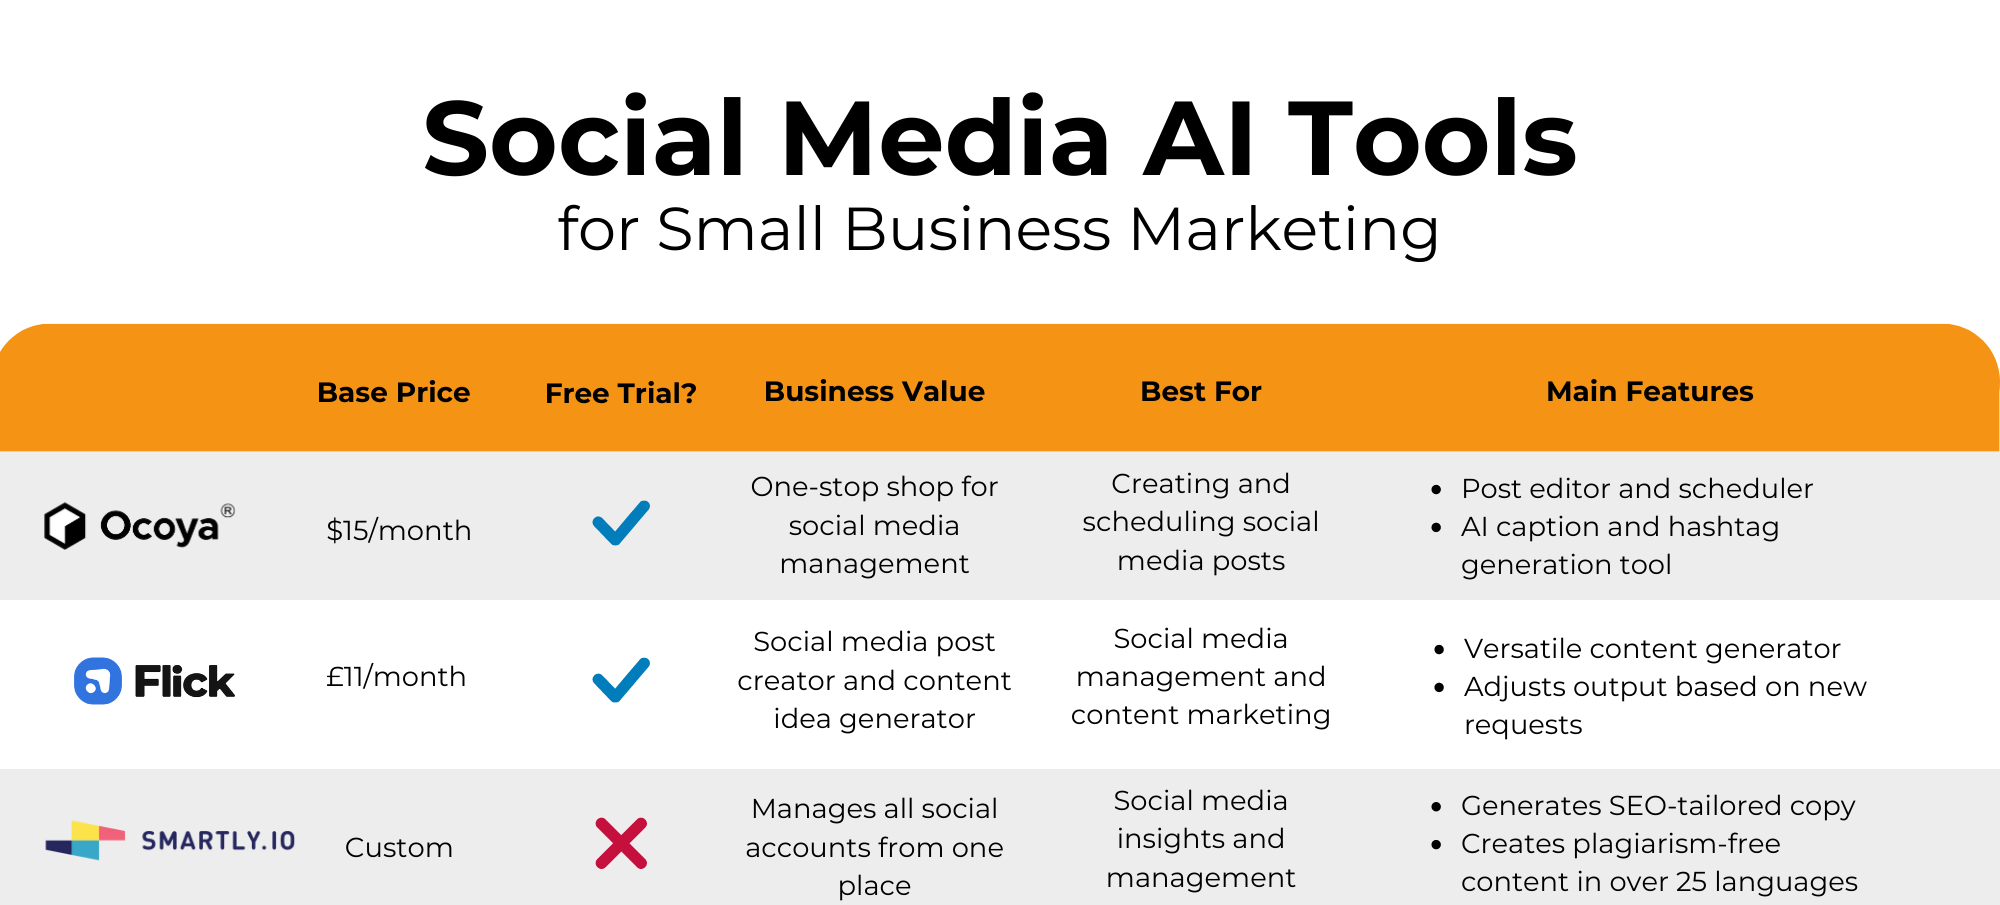 social media ai tools outlining previous facts in a visual format for small business owners